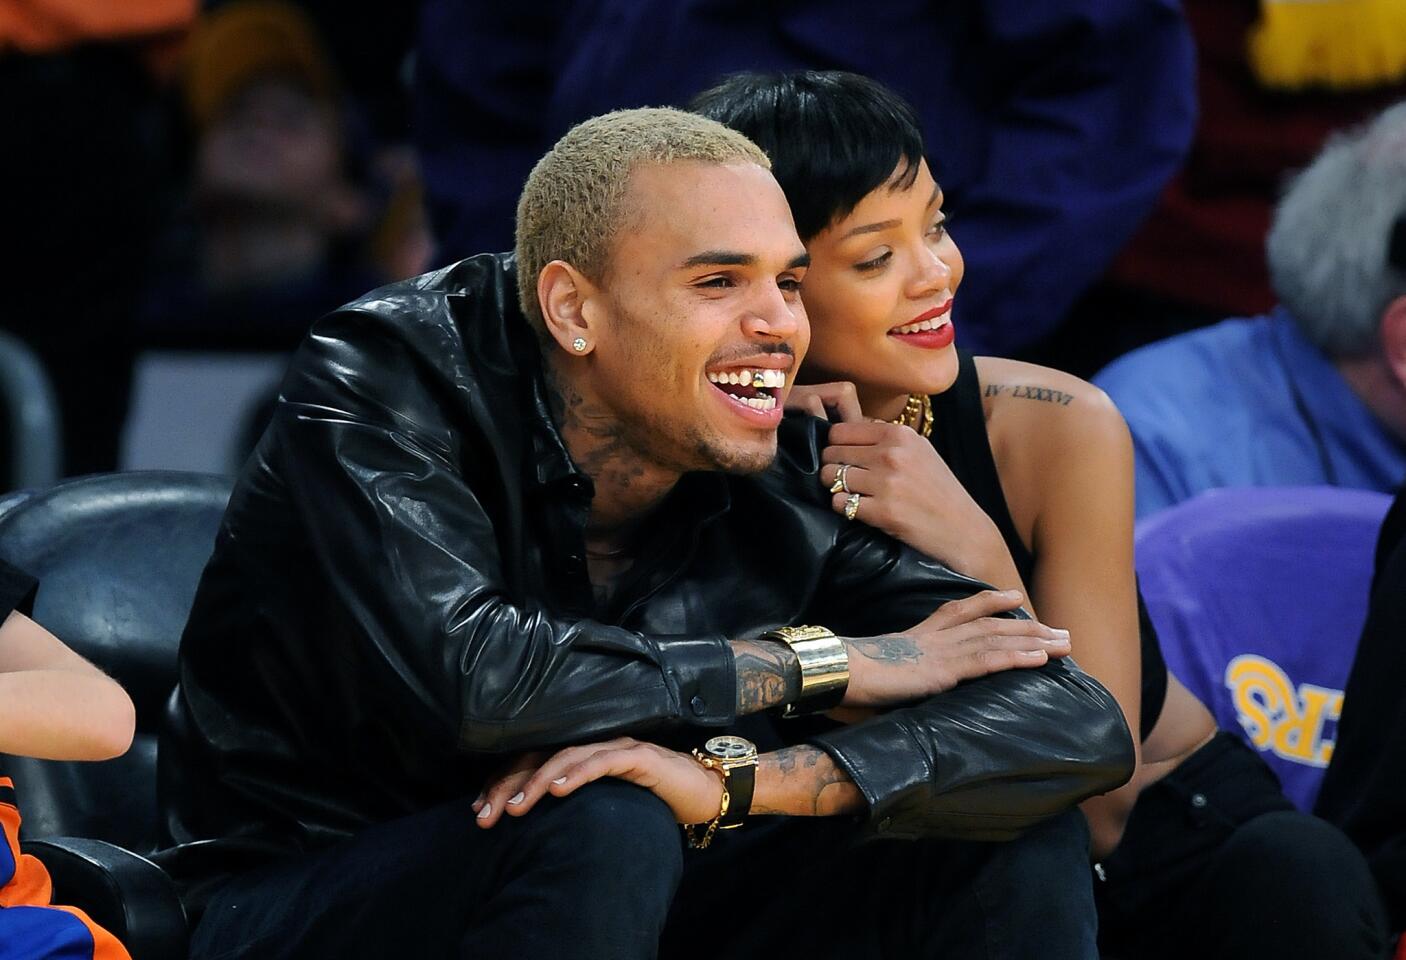 Rihanna, Chris Brown make their togetherness public at Lakers game